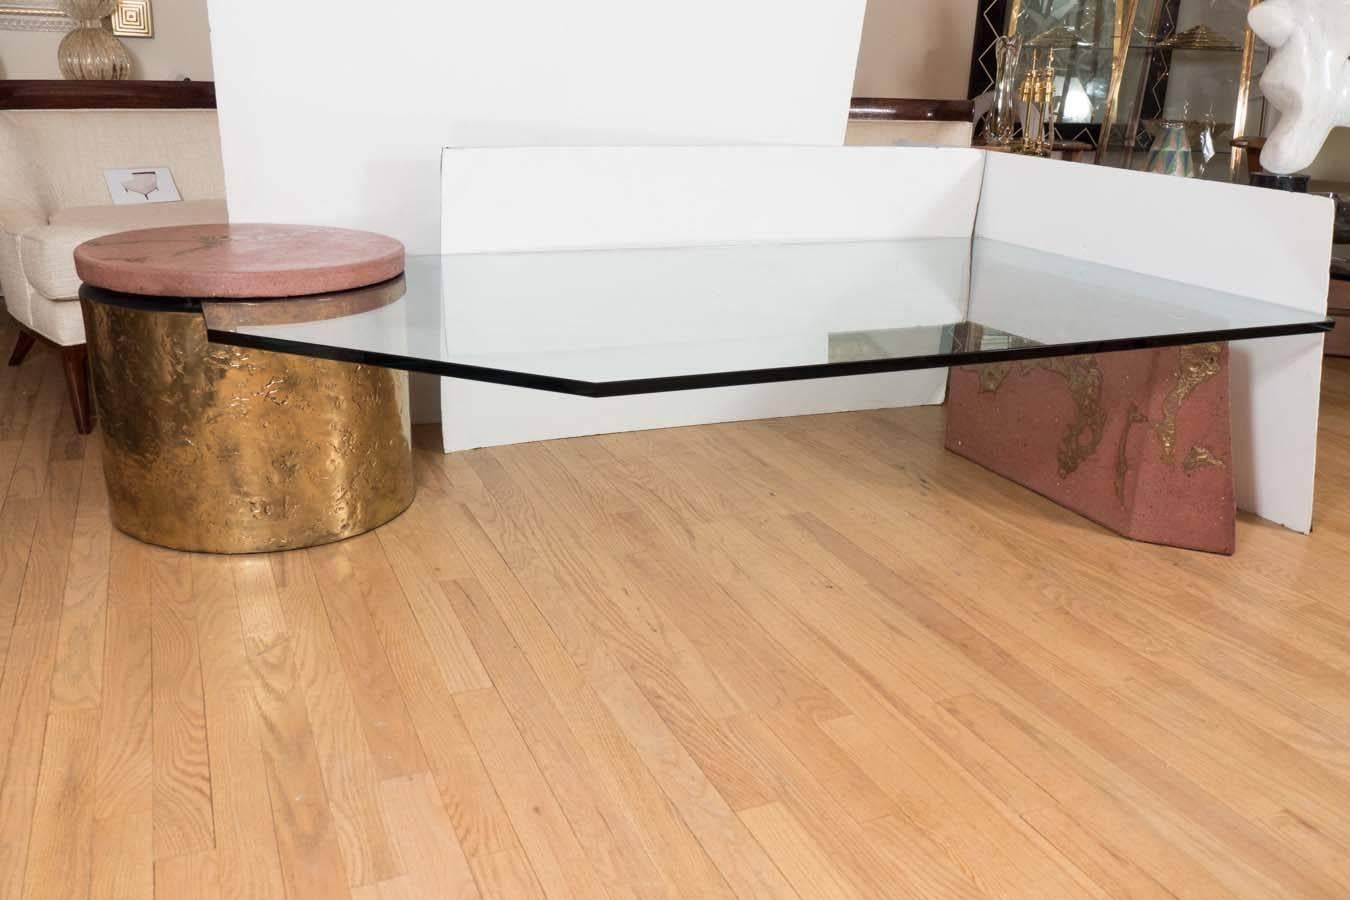 Rare three-part bronze, travertine and glass coffee table by Silas Seandel. Signed.